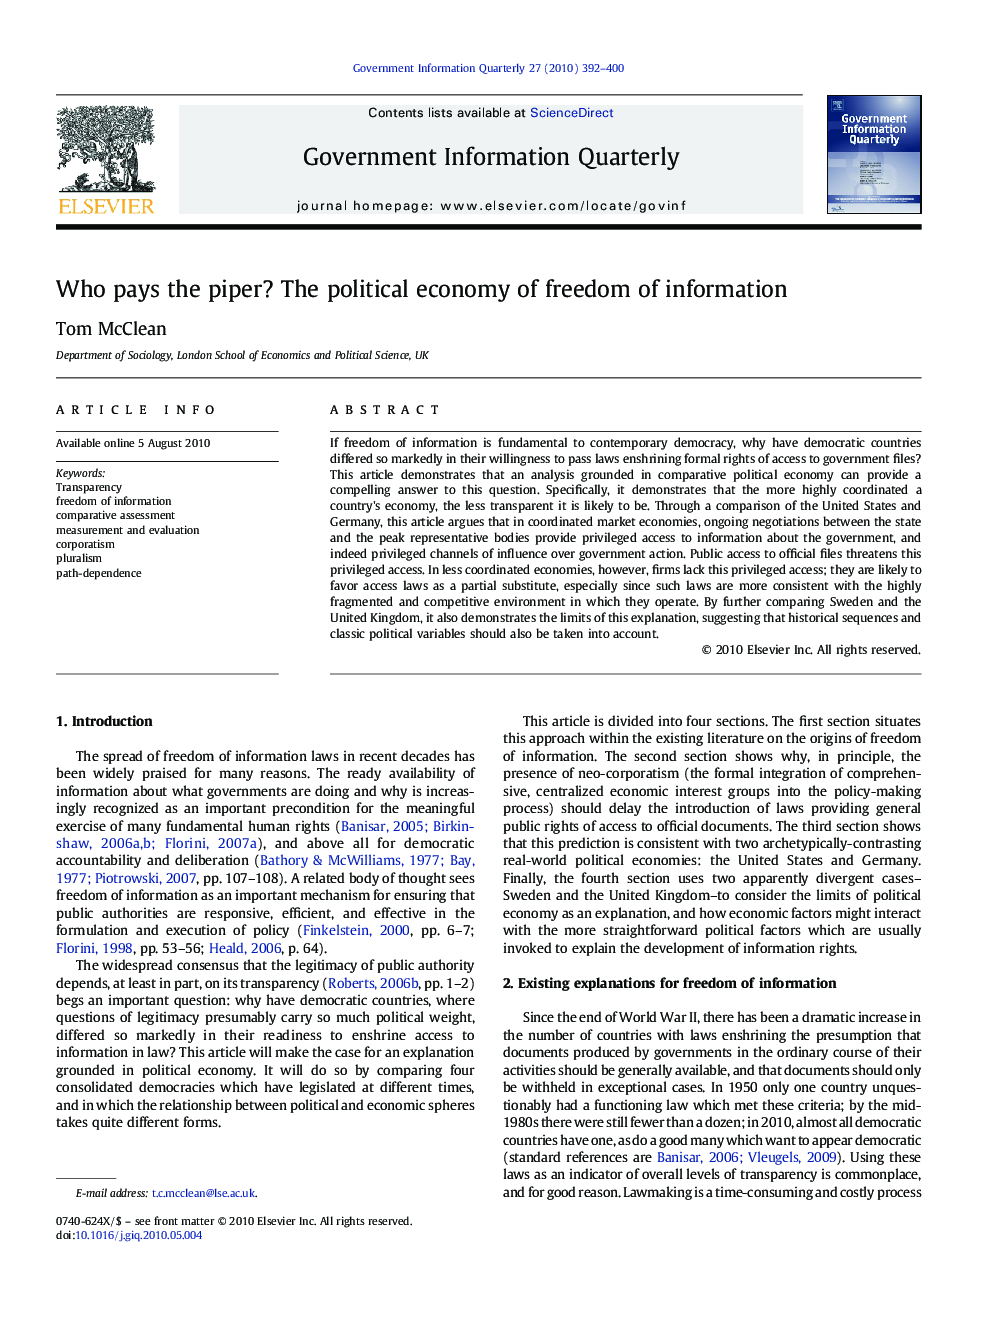 Who pays the piper? The political economy of freedom of information